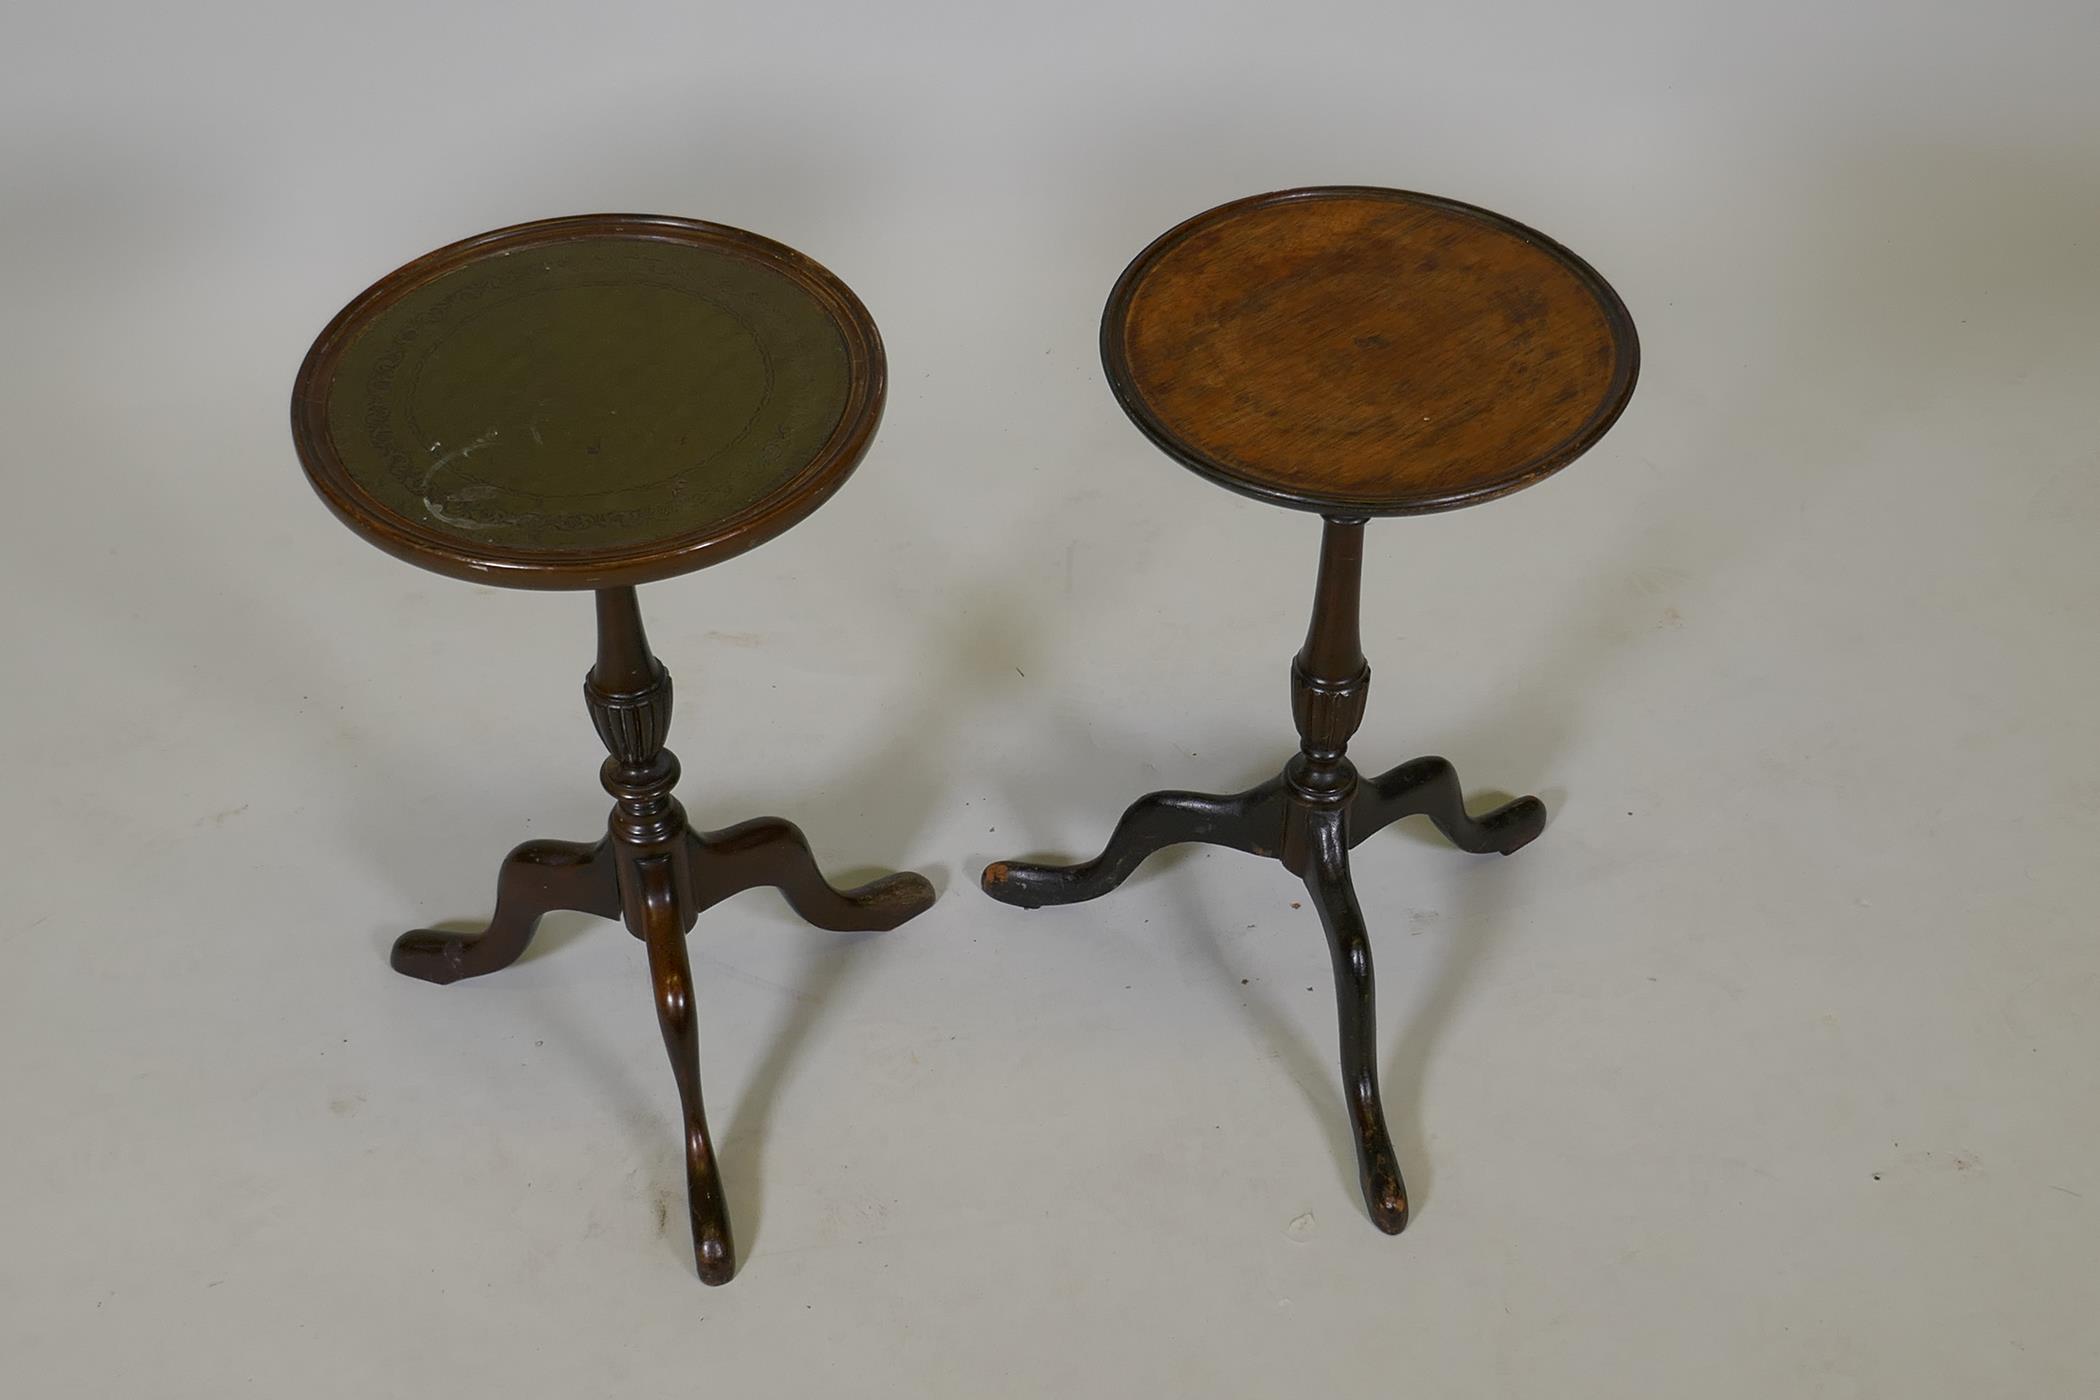 Two pedestal wine tables, one with leather inset top, 20" high, 12" diameter - Image 2 of 3